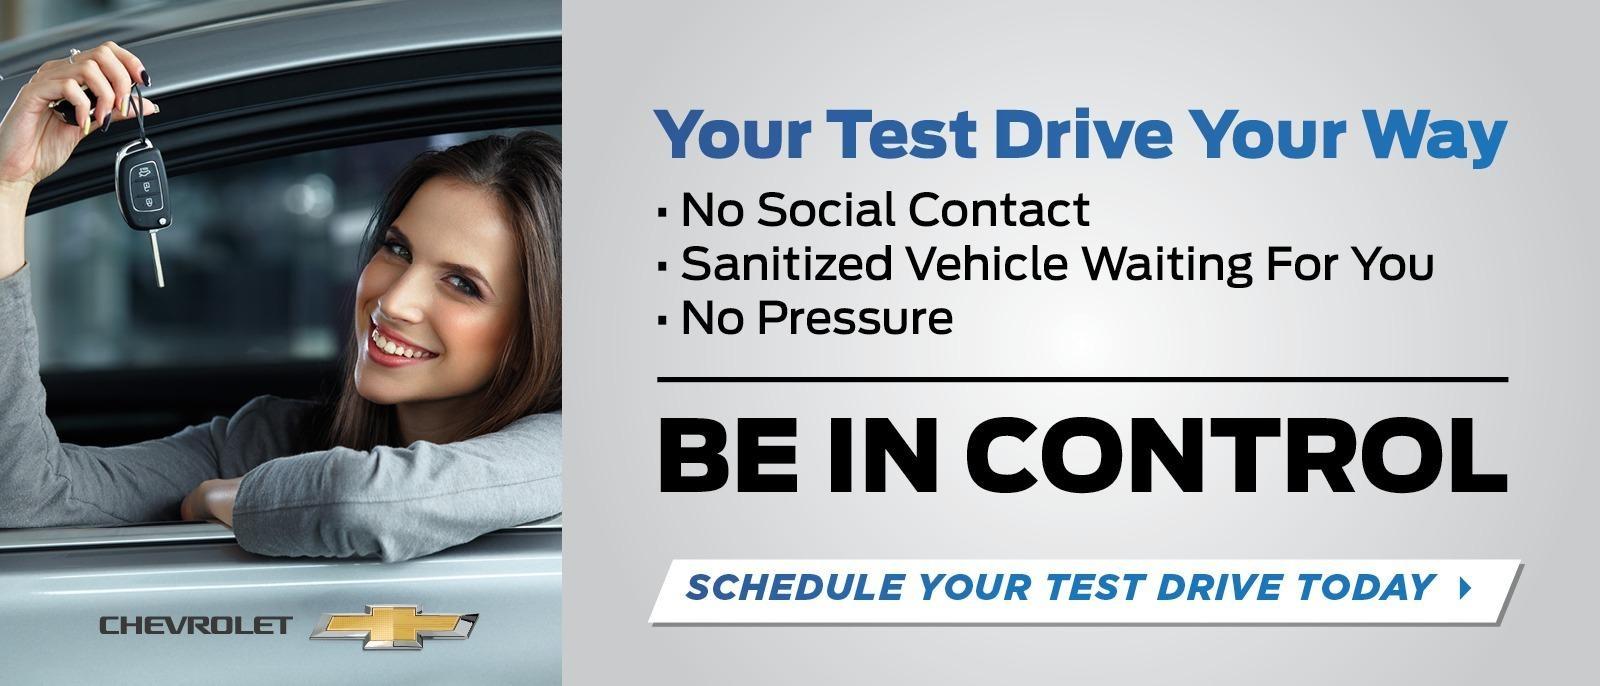 Your Test Drive Your Way • No Social Contact Sanitized Vehicle Waiting For You No Pressure